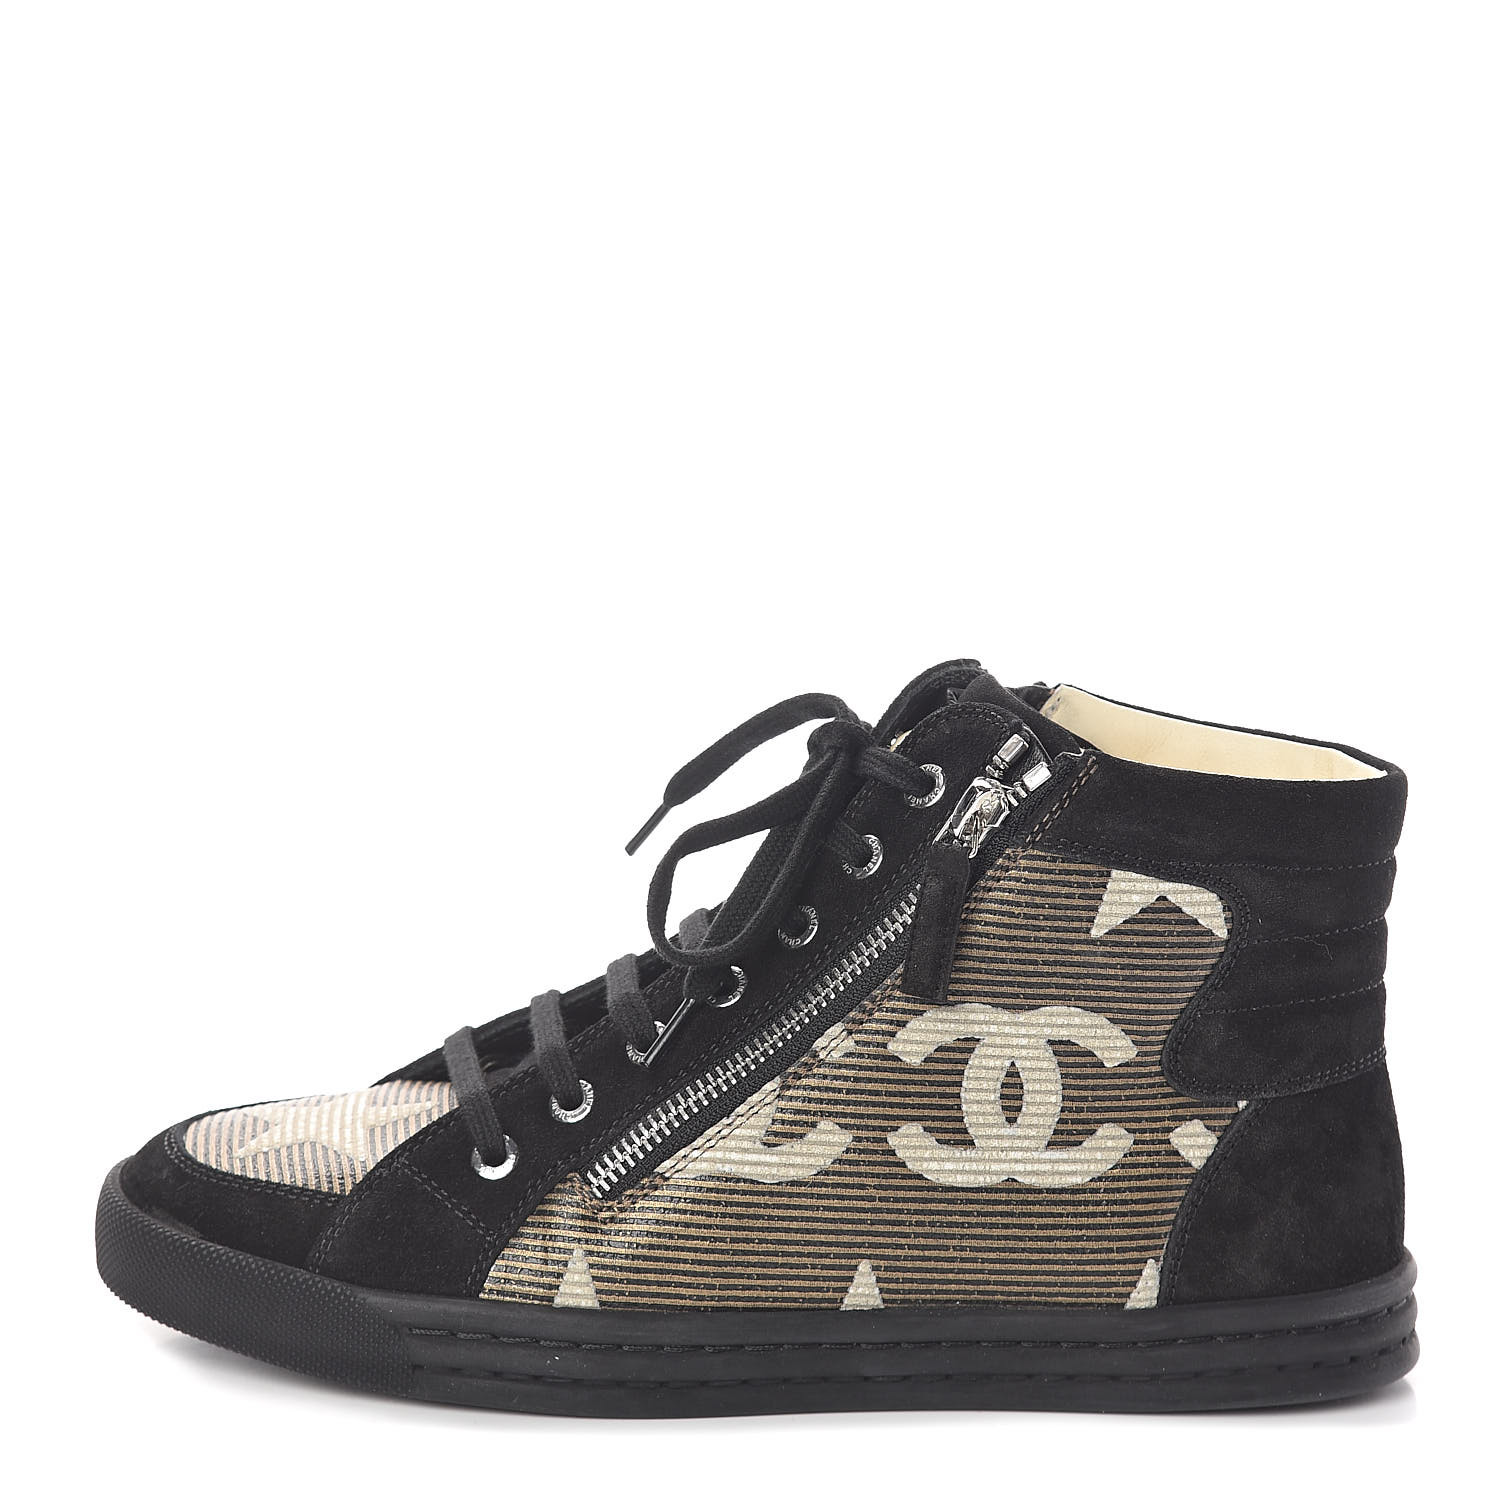 CHANEL Canvas Suede CC Star Zipped High 